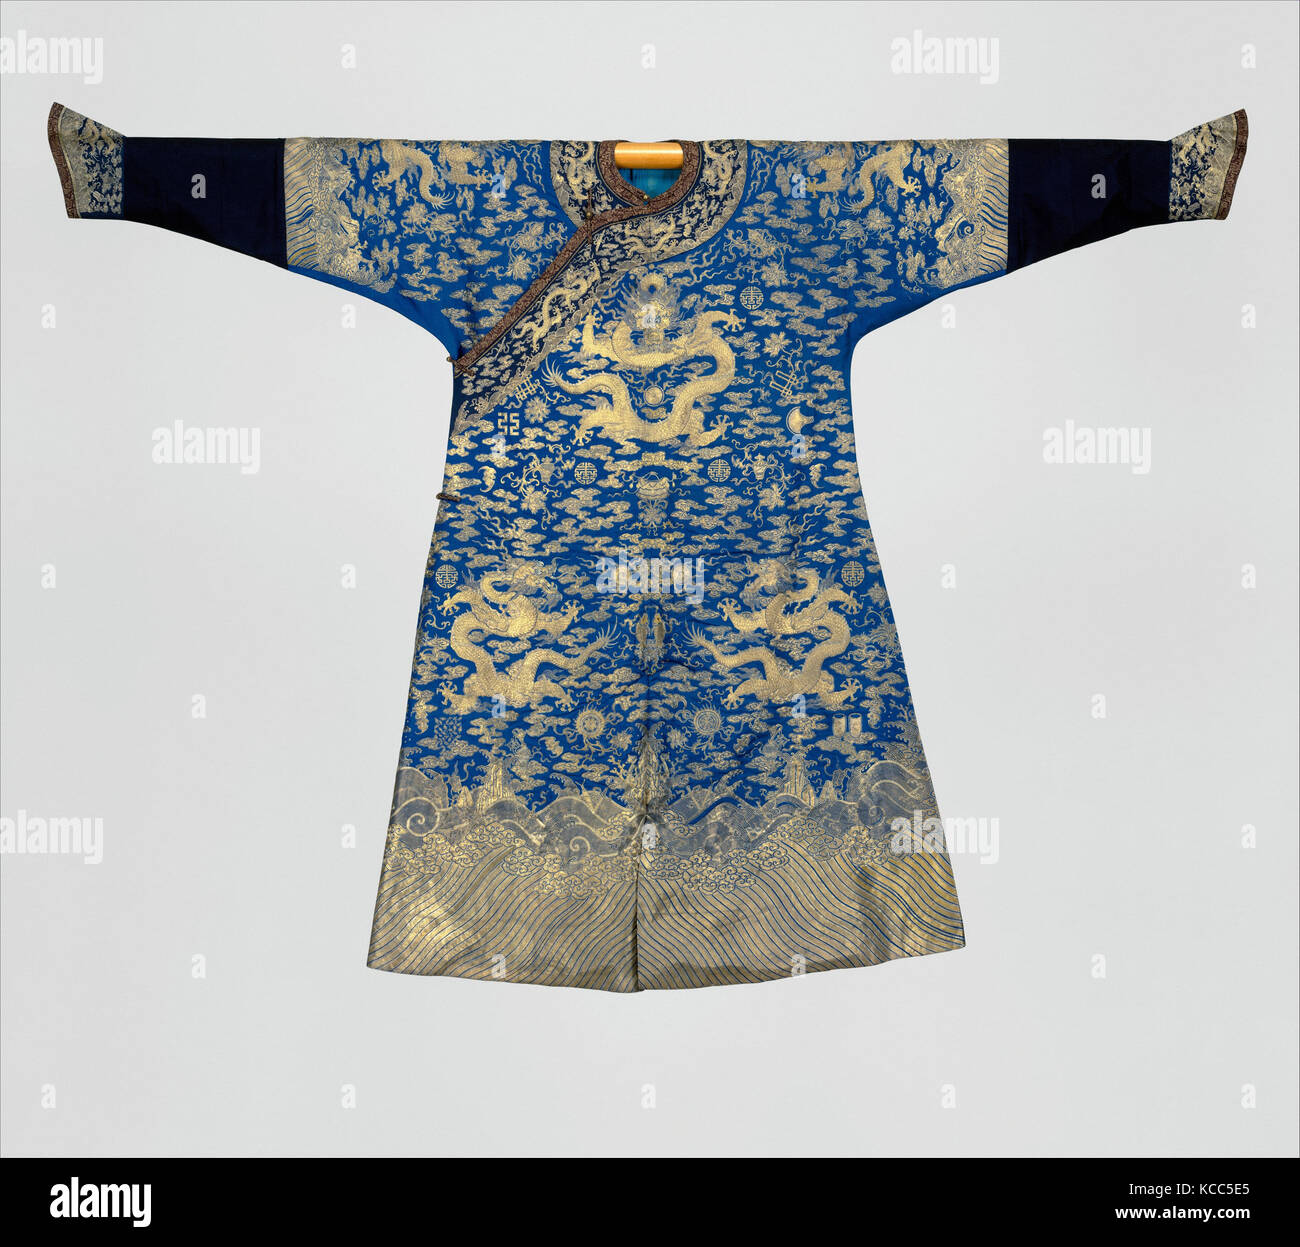 Festival Robe, Qing dynasty (1644–1911), second half of the 18th century, China, Silk and gold-and-silver thread embroidery on Stock Photo